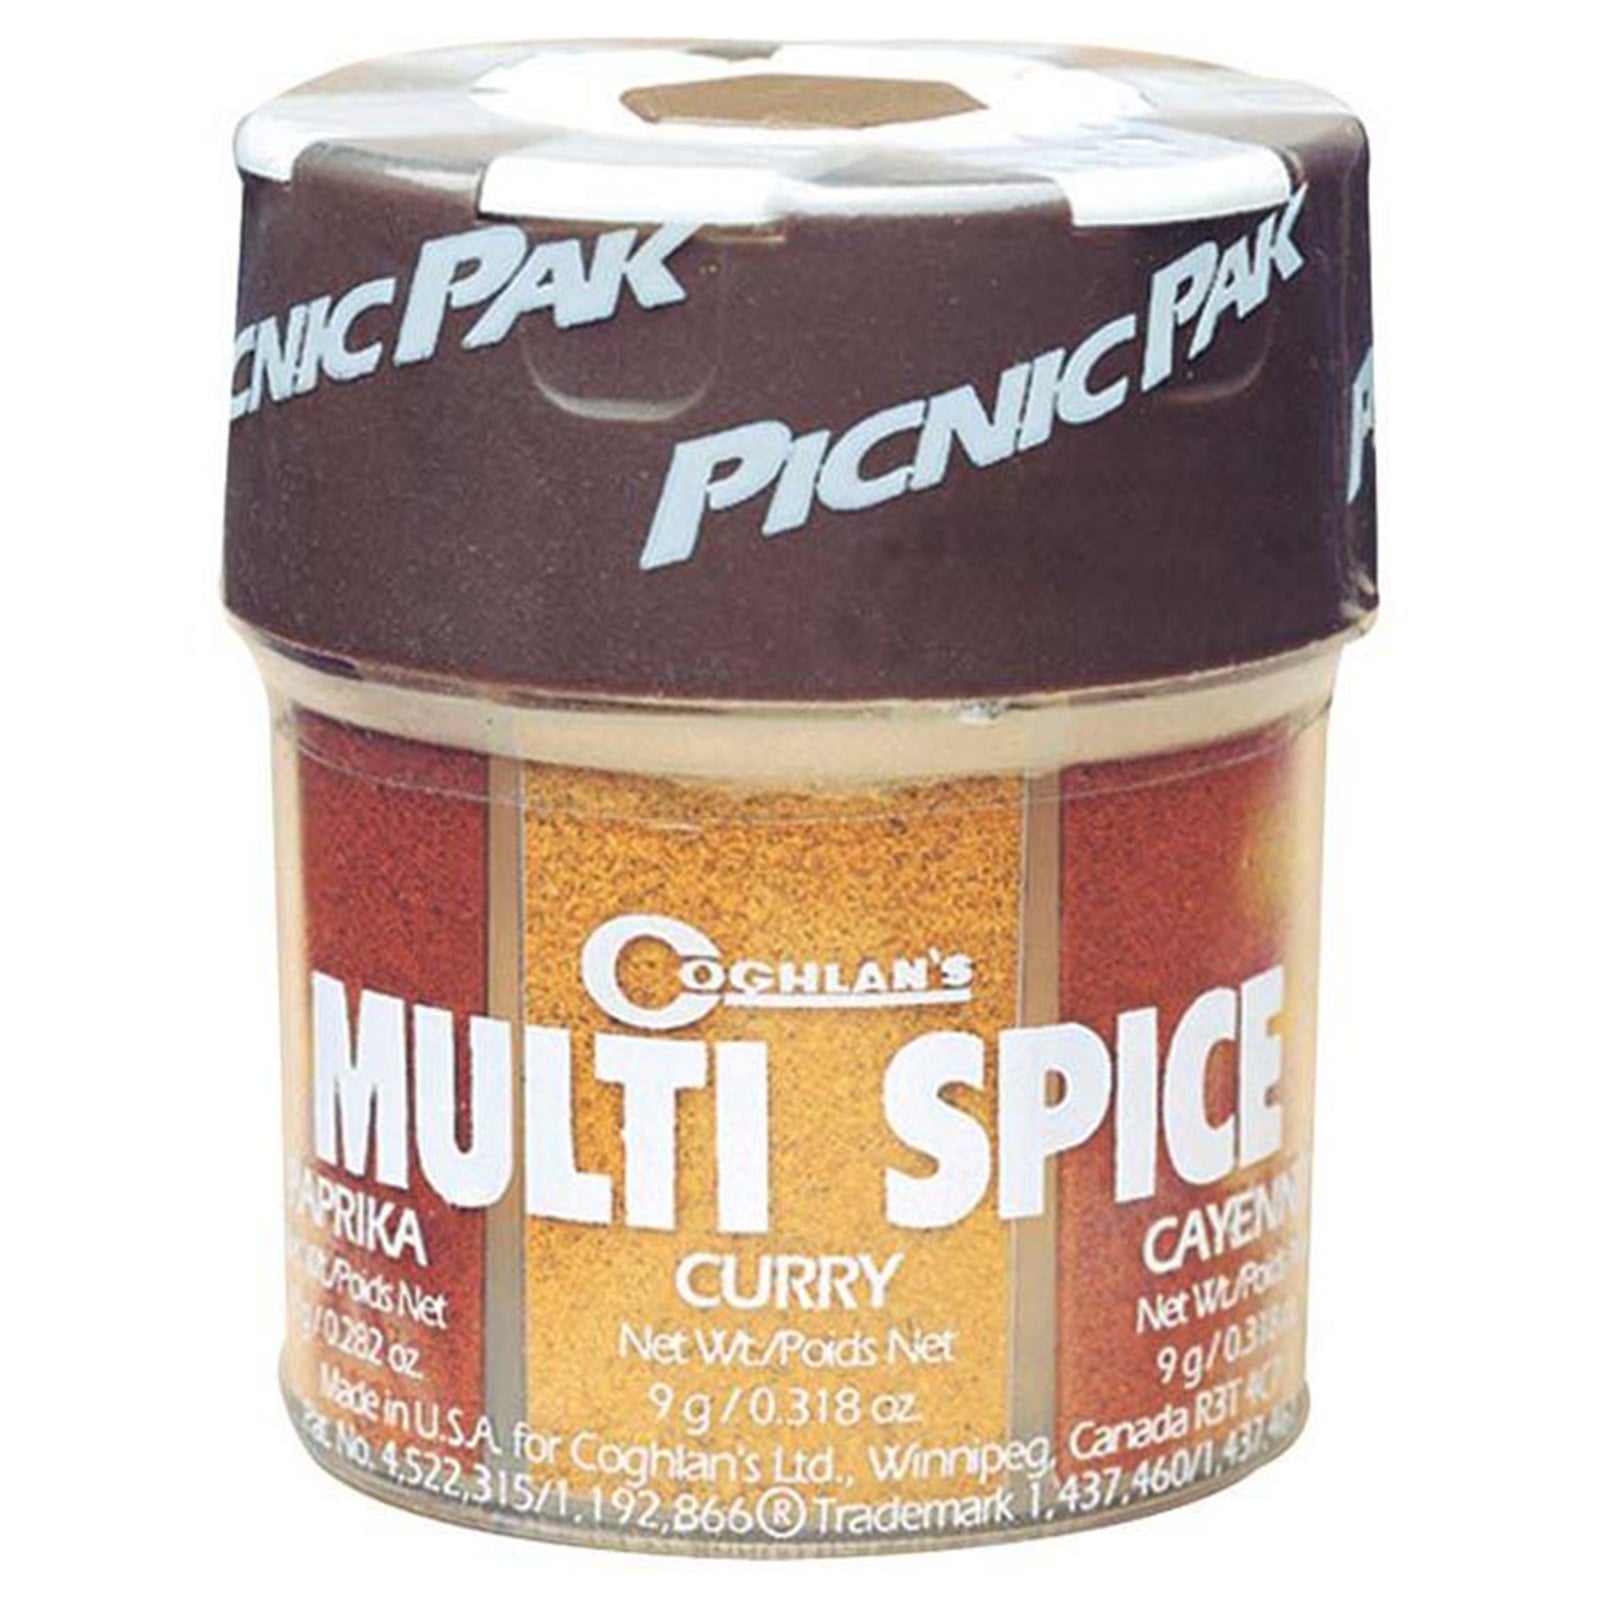 shows the front view of the multi spice container. visible are paprika, curry and cayenne